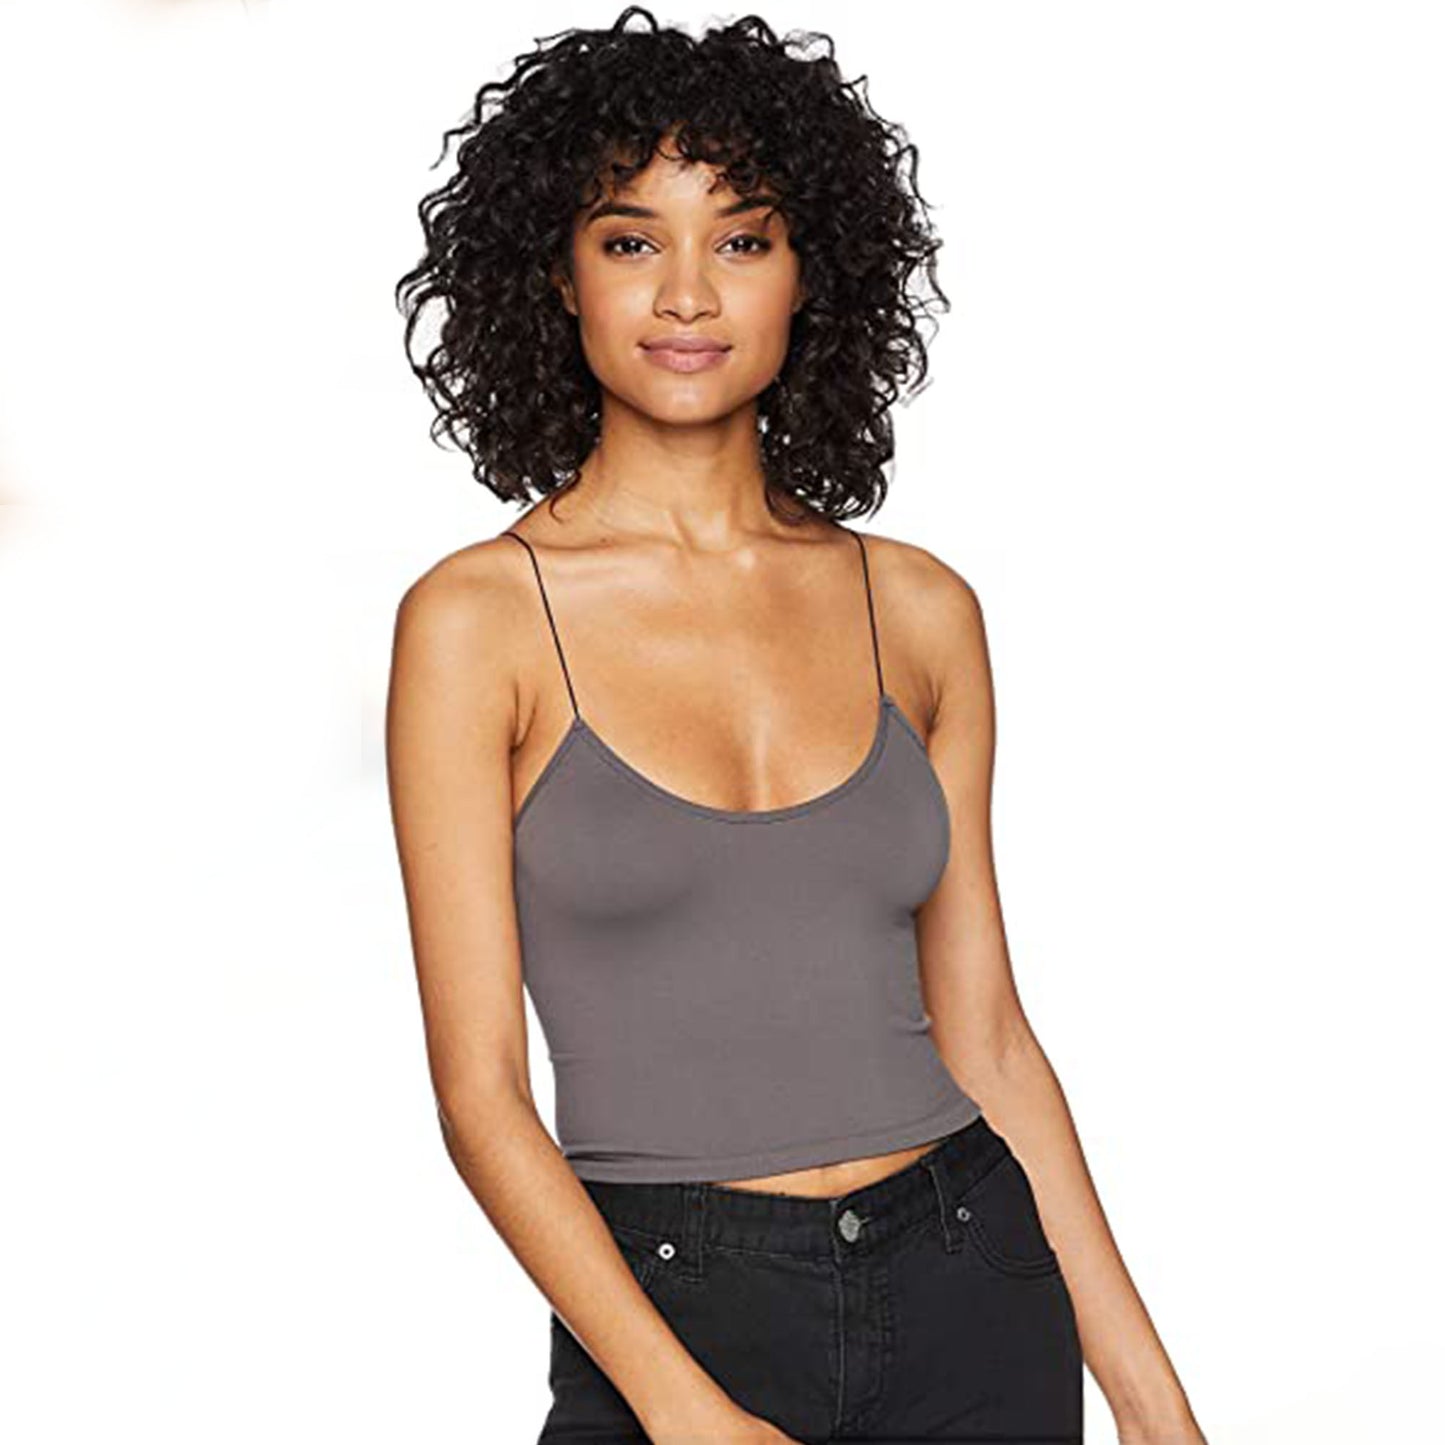 Free People Skinny Strap Brami. American made from our Signature Seamless fabric, this stretchy brami features elastic straps and a ribbed hem. The perfect little tank for lounging or hanging out with friends, this top is essential!